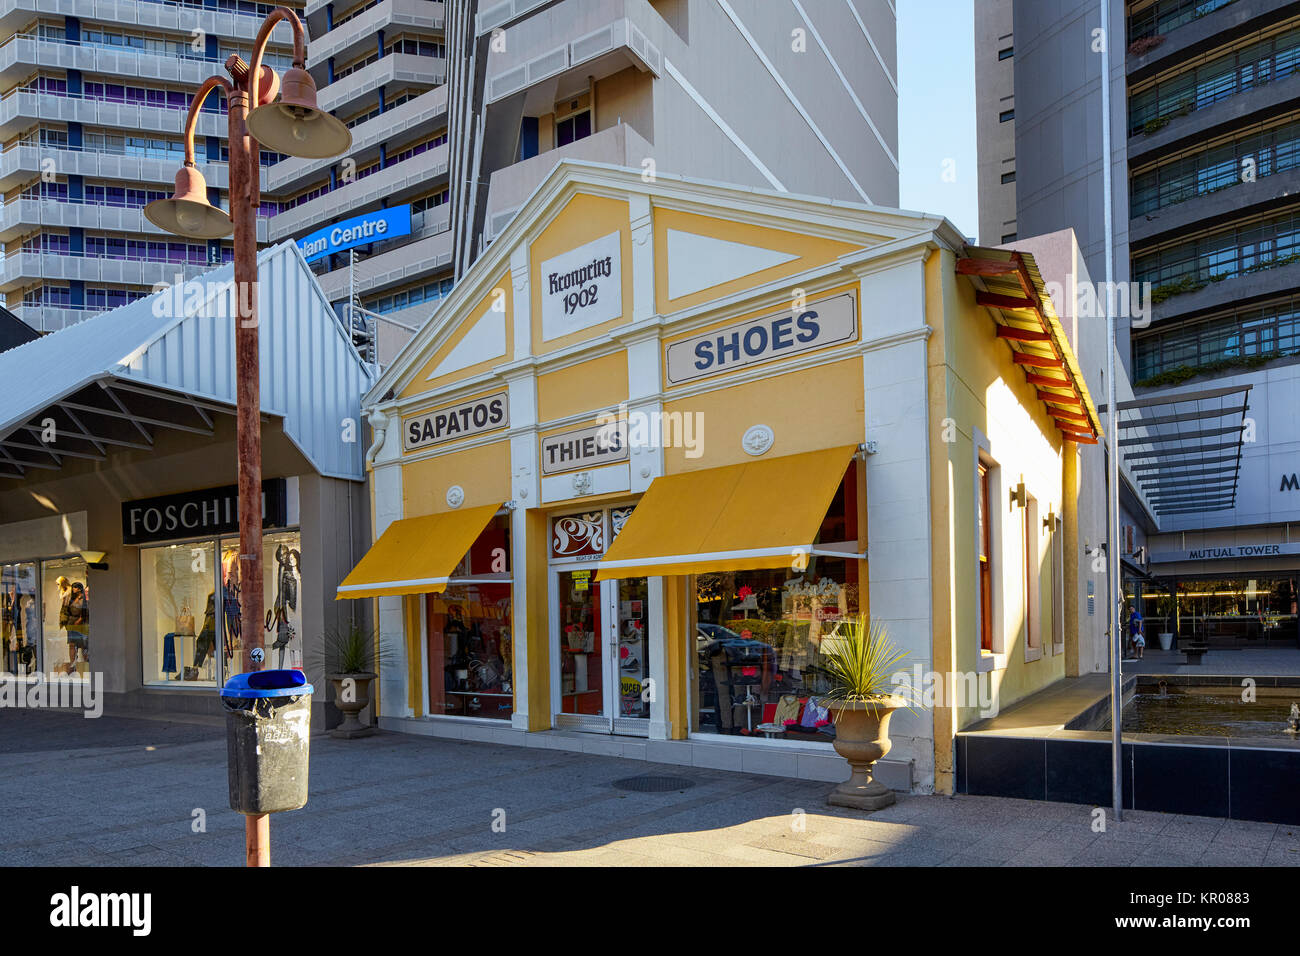 Calzatura Kromprinz Store (sapatos, thiels) su Viale Indipendenza, a Windhoek, Namibia, Africa Foto Stock